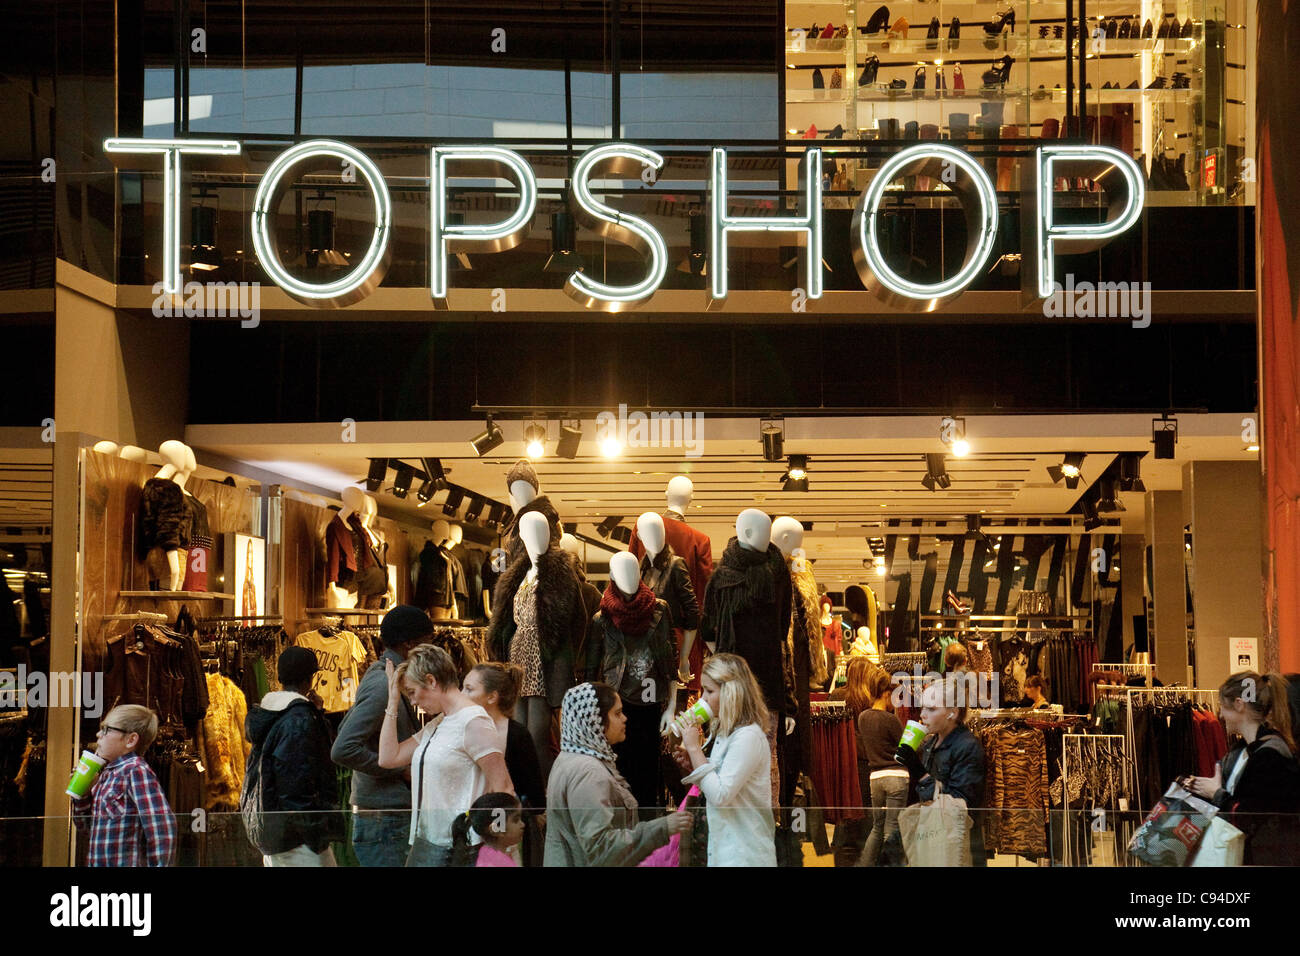 Front of the Topshop store, Westfield Shopping Centre Stratford London UK  Stock Photo - Alamy